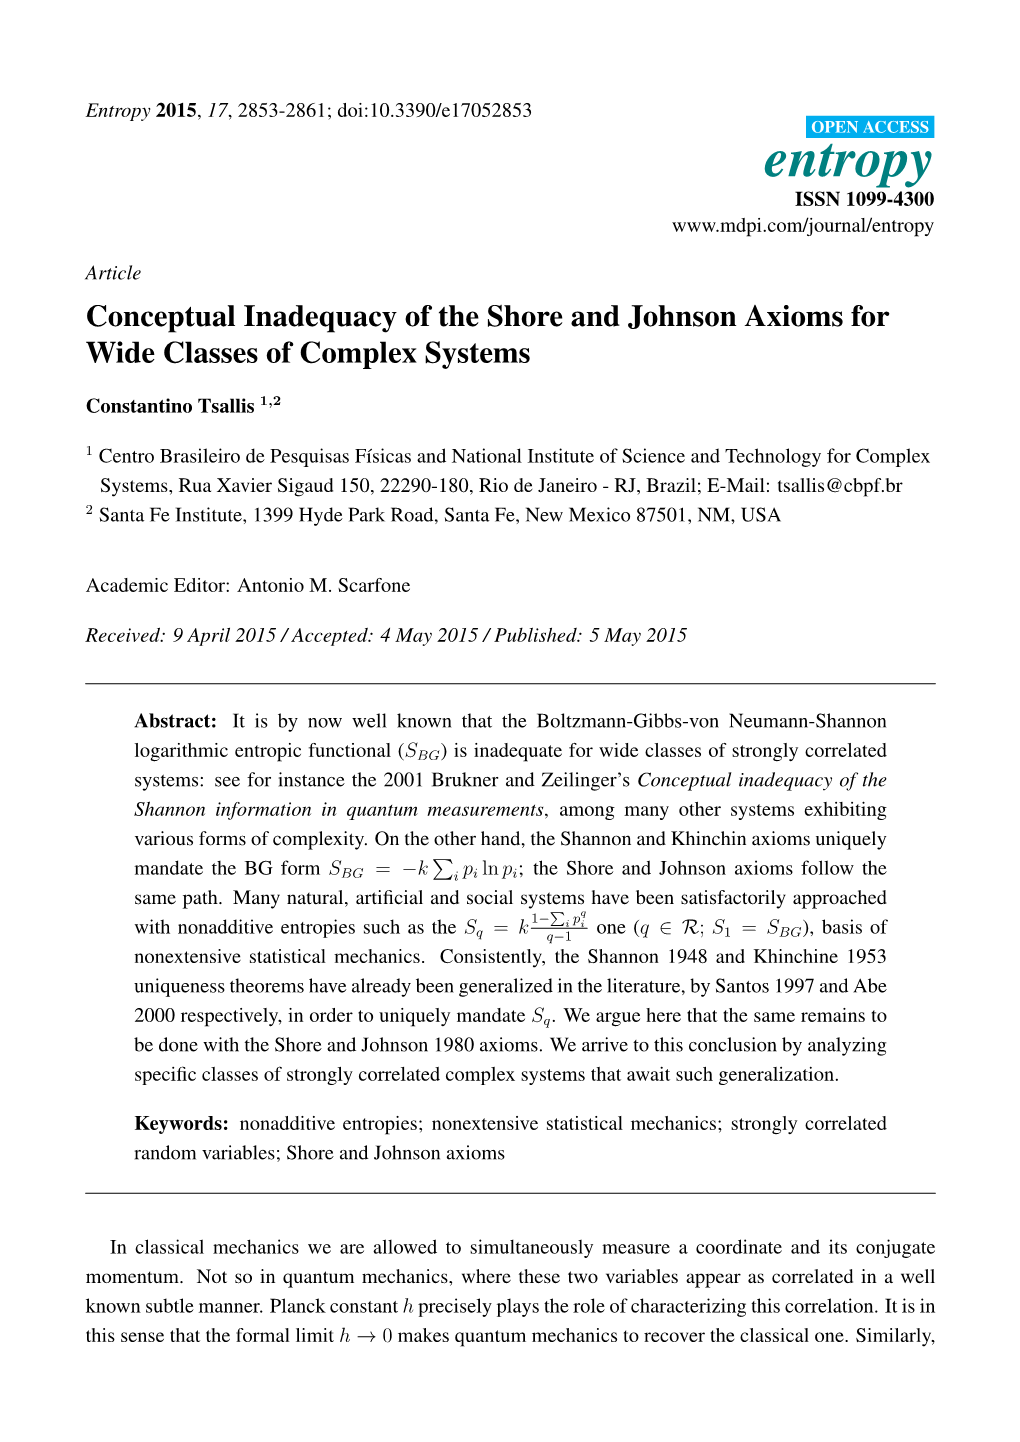 Conceptual Inadequacy of the Shore and Johnson Axioms for Wide Classes of Complex Systems